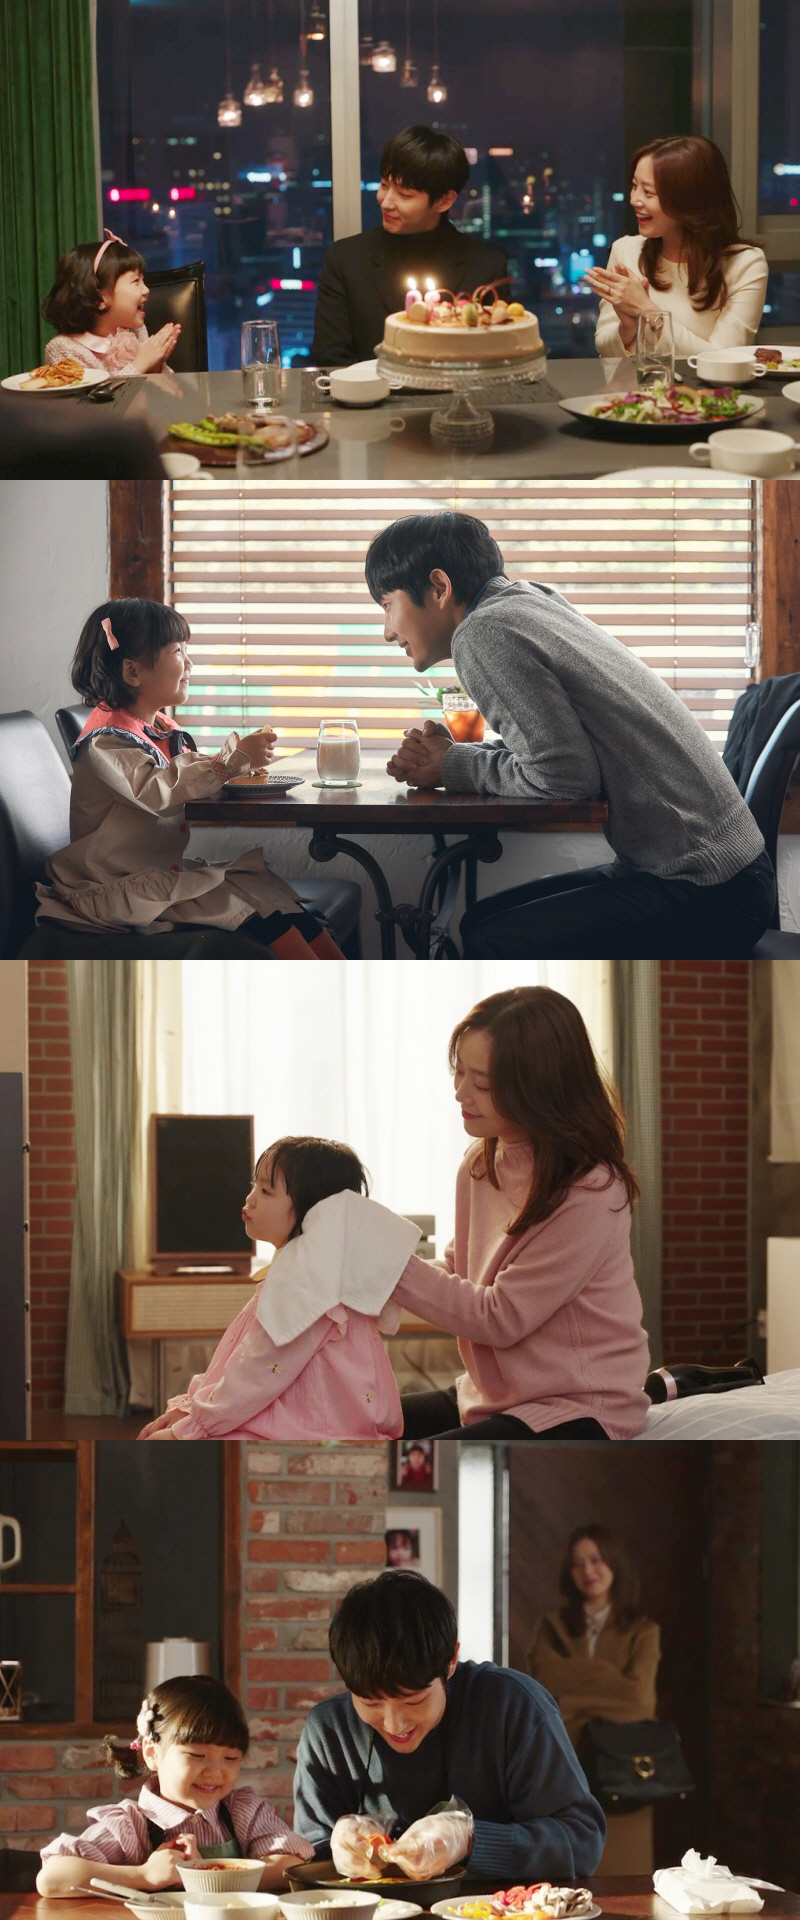 TVN The new Wednesday-Thursday evening drama Flower of Evil is revealing Lee Joon-gi and Moon Chae-won, who have transformed into a lovely couple, raising questions about melodrama.TVNs new Wednesday evening drama Flower of Evil (directed by Kim Cheol-gyu/playplayplay by Yoo Jung-hee/production studio Dragon, Monster Union) is a man who even played love, Baek Hee-sung (Lee Joon-gi), a wife who started to doubt his reality, and two people who face the truth that they want to ignore. The density sensibility tracker.With Lee Joon-gi (played by Baek Hee-sung) and Moon Chae-won (played by Cha Ji-won) getting attention as a couple in the play, expectations are also hot for the dense melodies that the two will show.Especially, there are cute daughters between the two, and they predict new aspects and feelings that have never been seen as couples and parents.In the first photo released, the happy daily life of Baek Hee-sung, Cha Ji-won and his daughter, Eunha (Eung Seo-yeon), are caught and attract attention.Baek Hee-sung and the car support face of the exciting daughter Eunha in front of the birthday cake literally Father Smile and Mom Smile are floated.The hand of the car support that dries the daughters head is skillful, and the affectionate father Baek Hee-sung, who feeds the daughters handmade rice, and the car support that watches it from behind, raises the corners of the viewers mouth.Especially, Lee Joon-gi and Moon Chae-won, who naturally melt into the couple, feel the chemistry and add to the atmosphere that is combined with their daughters emotional love.But behind this routine, a shocking question, What if my husband, who has been in love for 14 years, is suspected of being a serial killer? Is waiting for a moment of unreliable truth tracking.What is true and false, the doubts that arise between the two go to the melodrama and the suspense full of tension.In the meantime, Baek Hee-sung has been acting to hide what he has been doing, and the story of the criminal detective, who started to doubt Baek Hee-sung, is curious about whether he will be chased.On the other hand, TVNs new Wednesday-Thursday evening drama Flower of Evil will be broadcasted in July, which is expected to be filled with concentration of melo-suspense that Lee Joon-gi and Moon Chae-won will show.